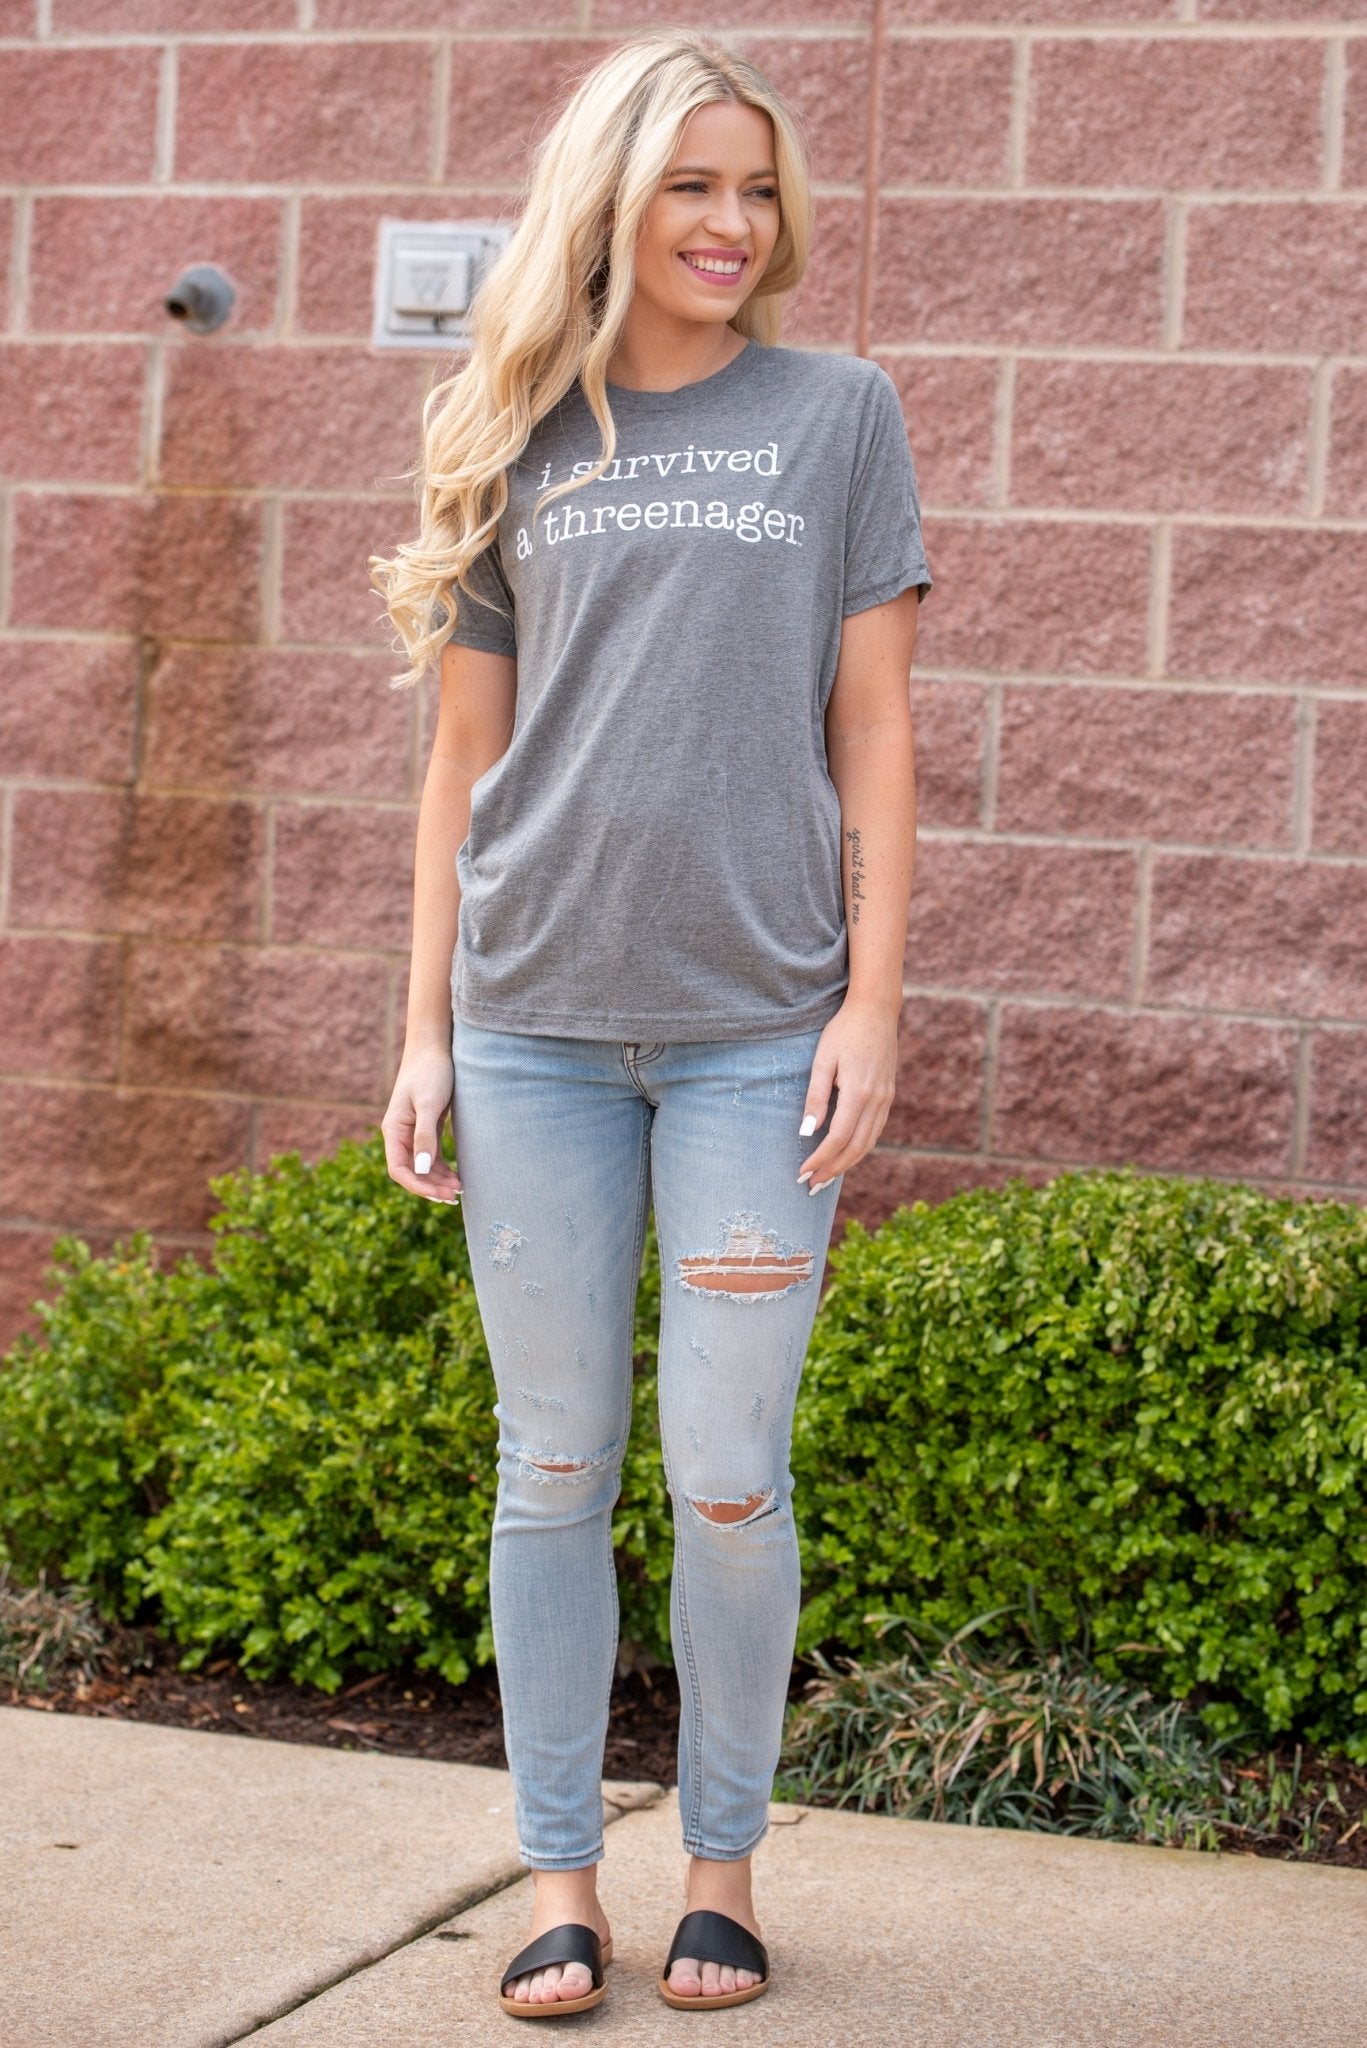 I survived a threenager unisex short sleeve t-shirt grey - Trendy T-shirts - Cute Graphic Tee Fashion at Lush Fashion Lounge Boutique in Oklahoma